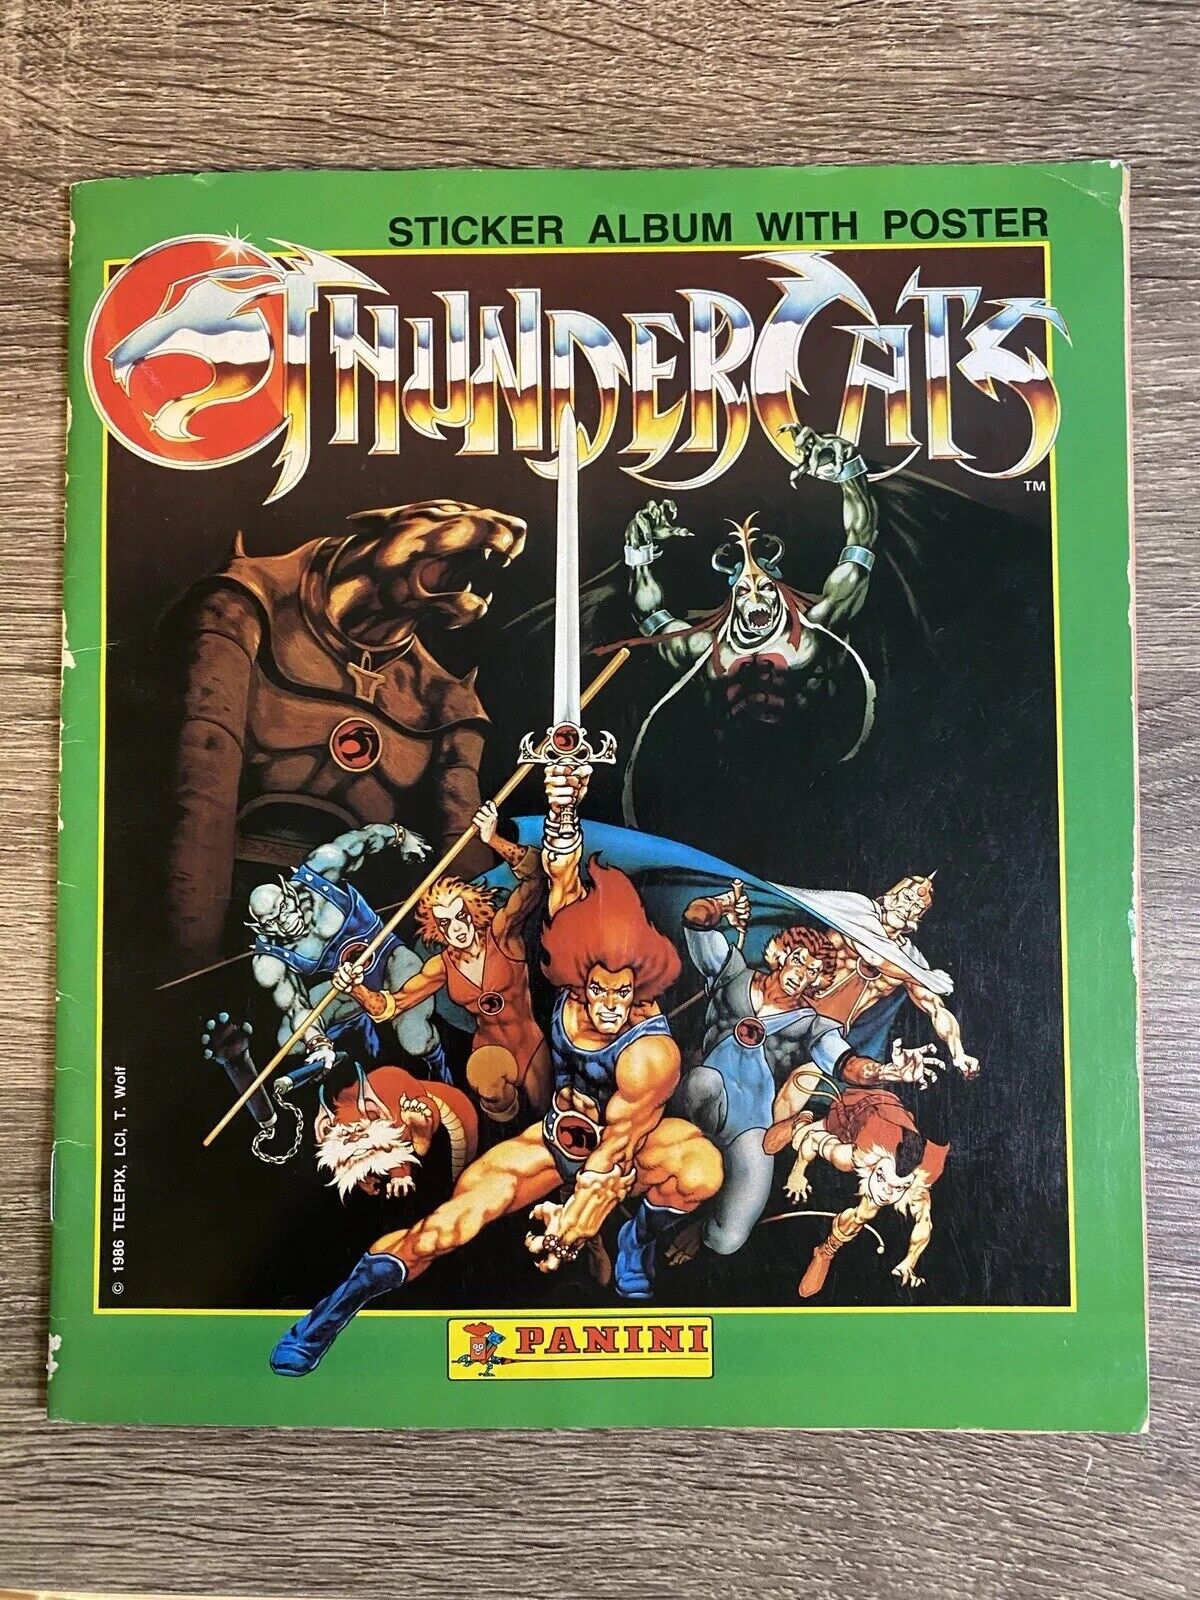 Vintage ThunderCats Sticker Album 1986 Panini 113 Stickers Poster Included Fair